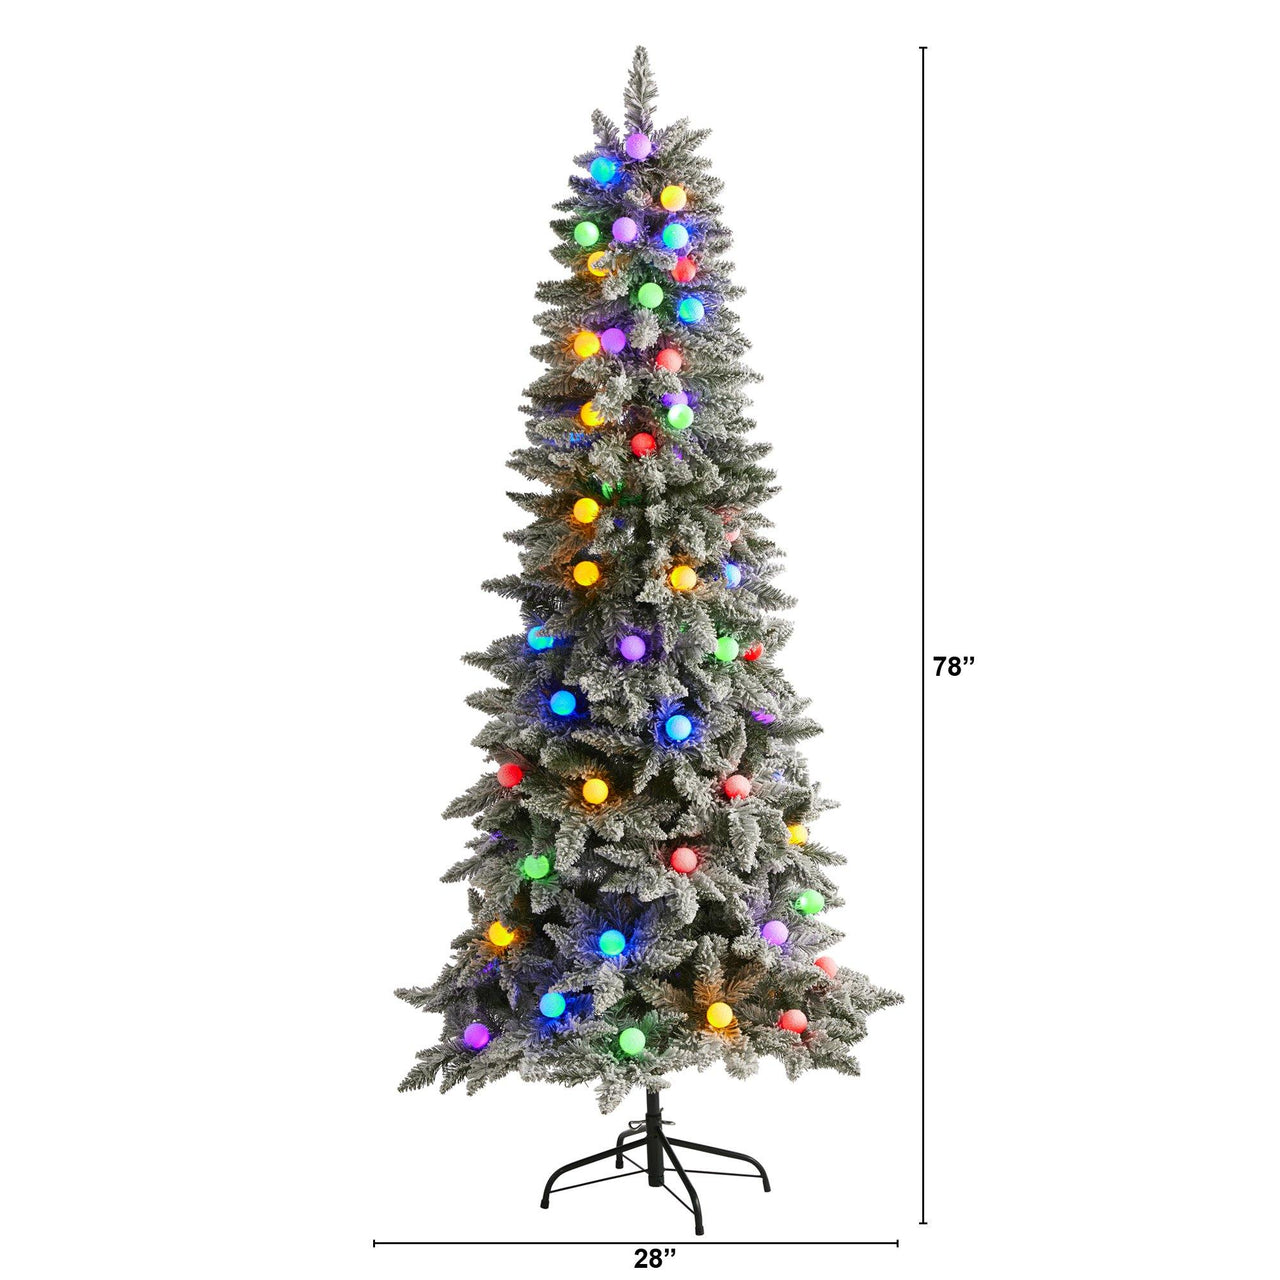 6.5' Flocked British Columbia Mountain Fir Artificial Christmas Tree in Decorative Planter with 75 Multi Color Globe Bulbs and 679 Bendable Branches - The Fox Decor